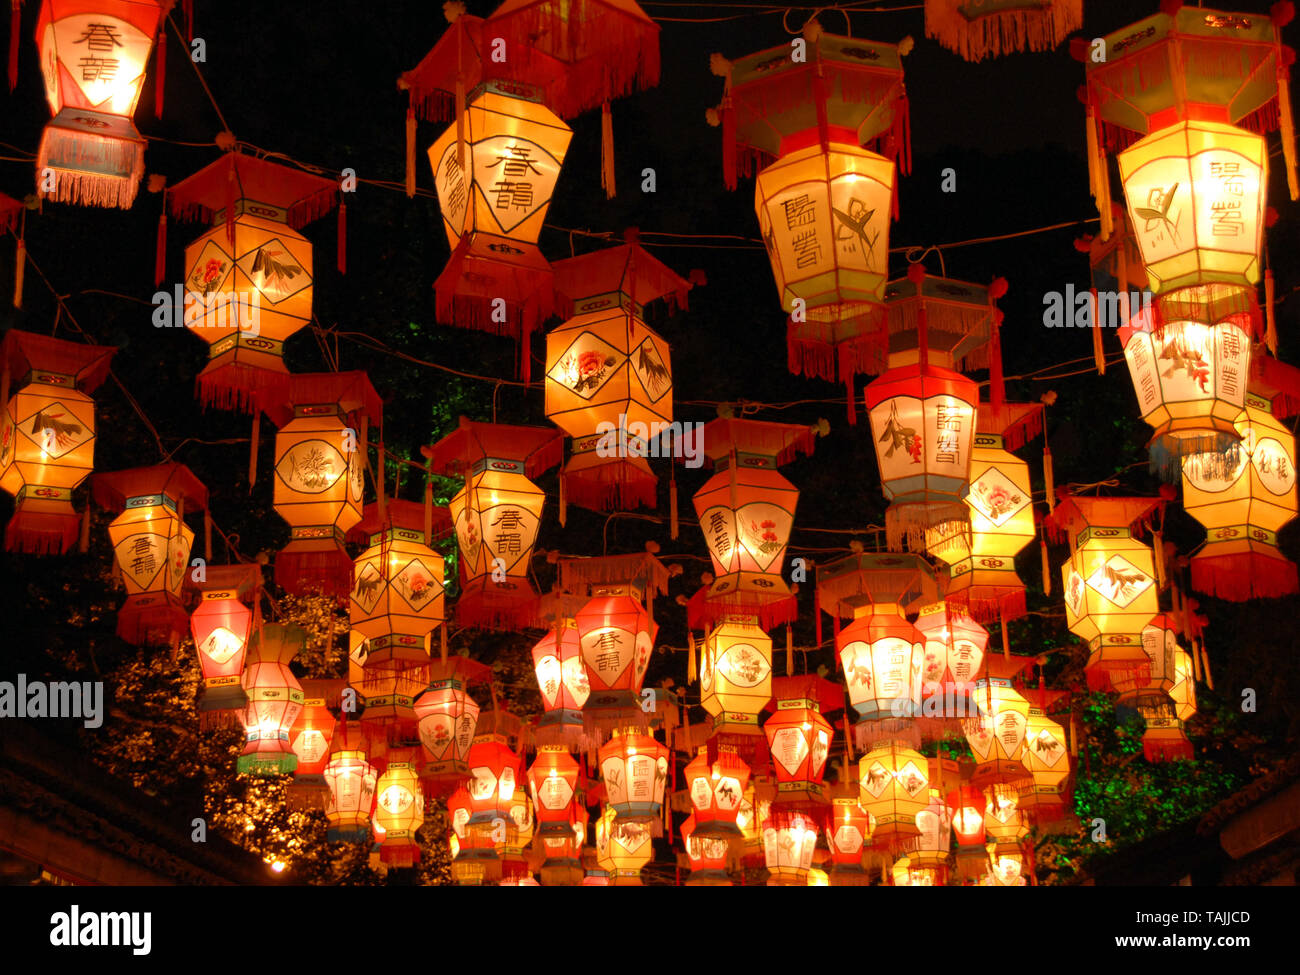 Chinese lanterns in Chengdu at the Wuhou Temple Lantern Festival in Chengdu, China. The red and gold lanterns are for Chinese New Year. Red lanterns. Stock Photo